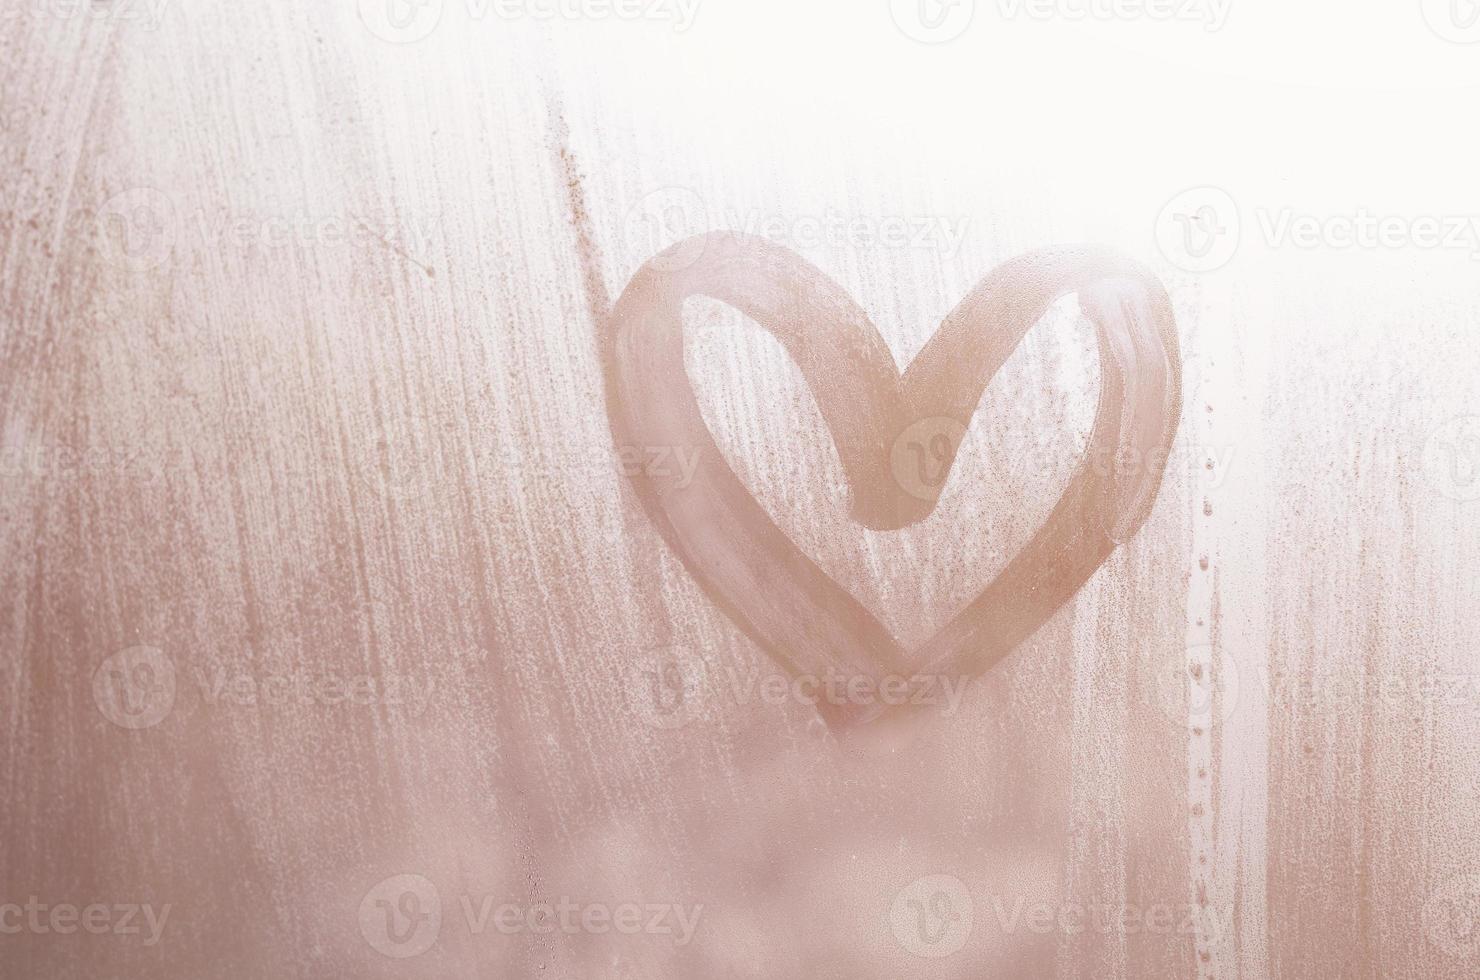 A heart-shaped drawing drawn by a finger on a misted glass in rainy weather photo